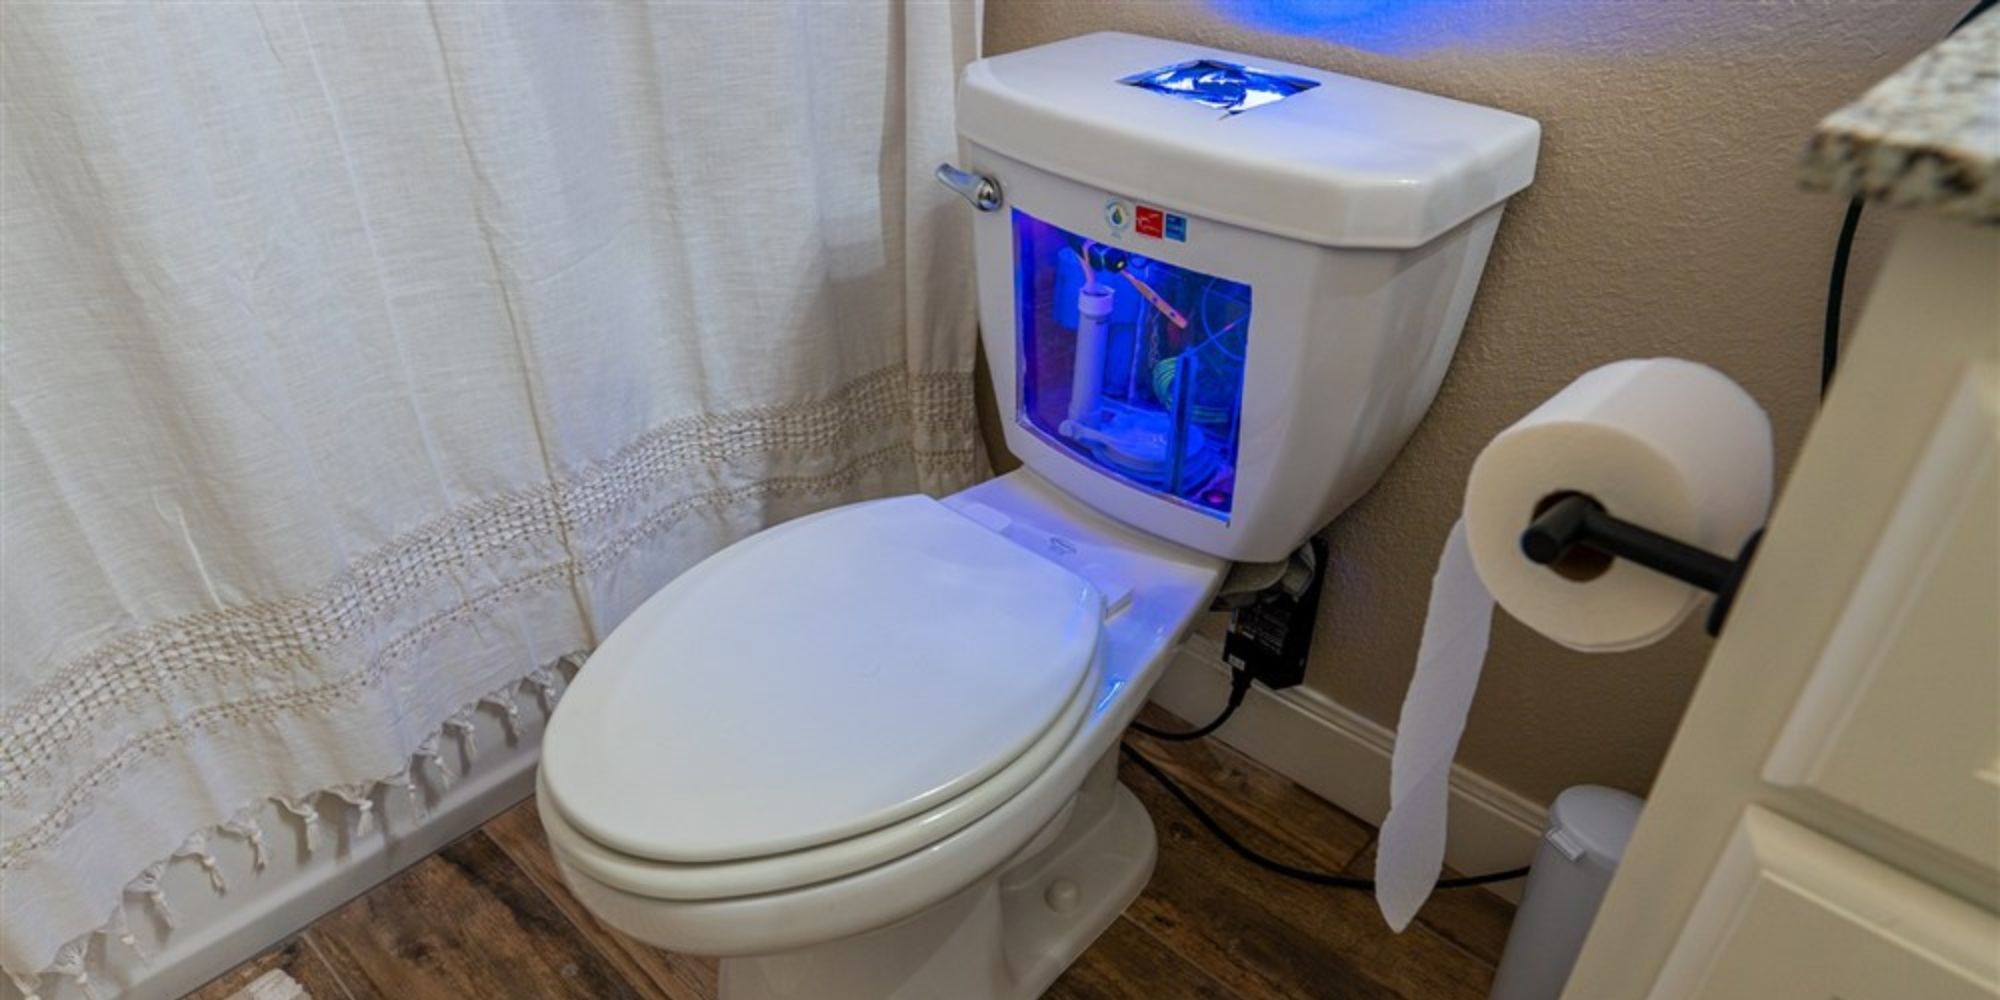 A PC made otu of a toilet